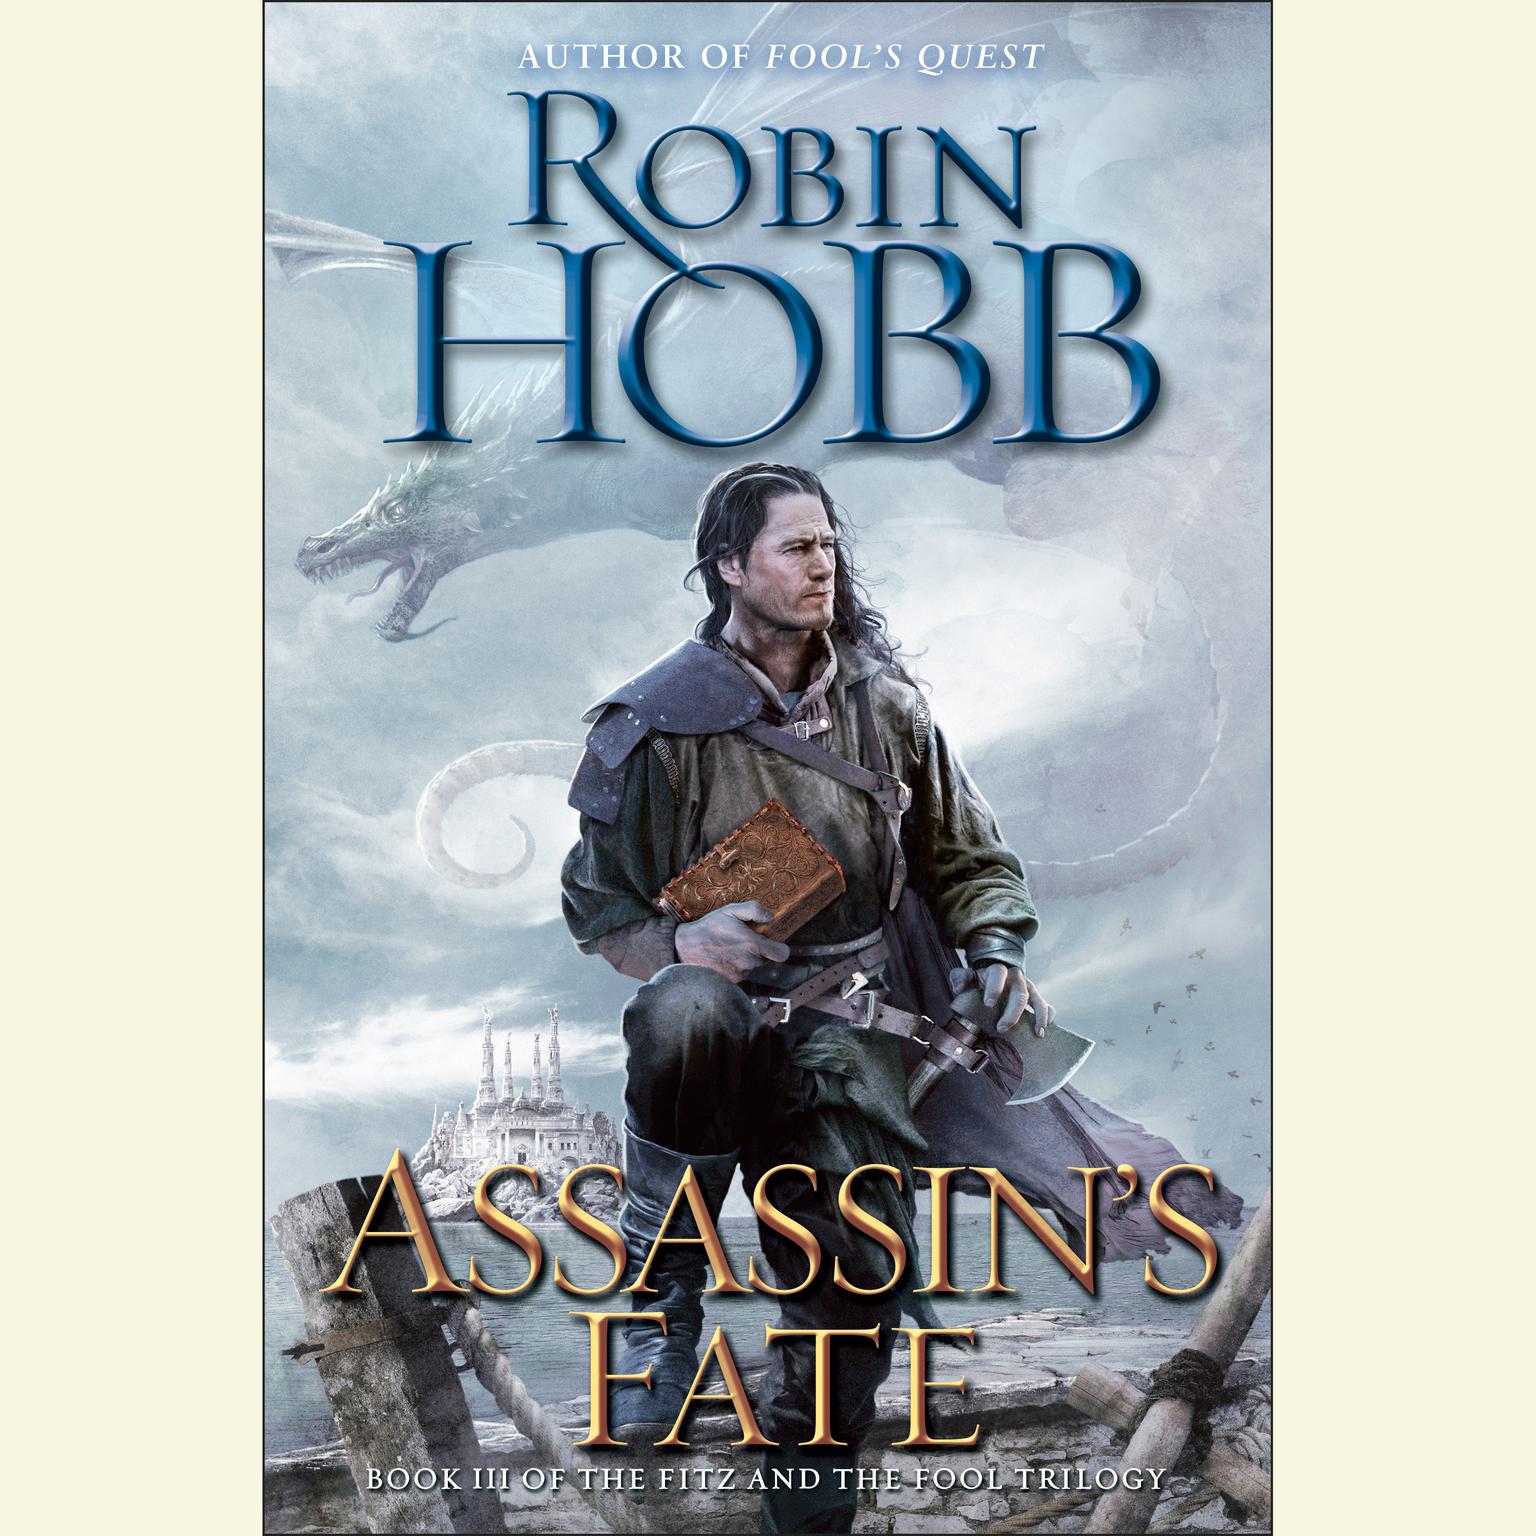 Assassins Fate: Book III of the Fitz and the Fool trilogy Audiobook, by Robin Hobb